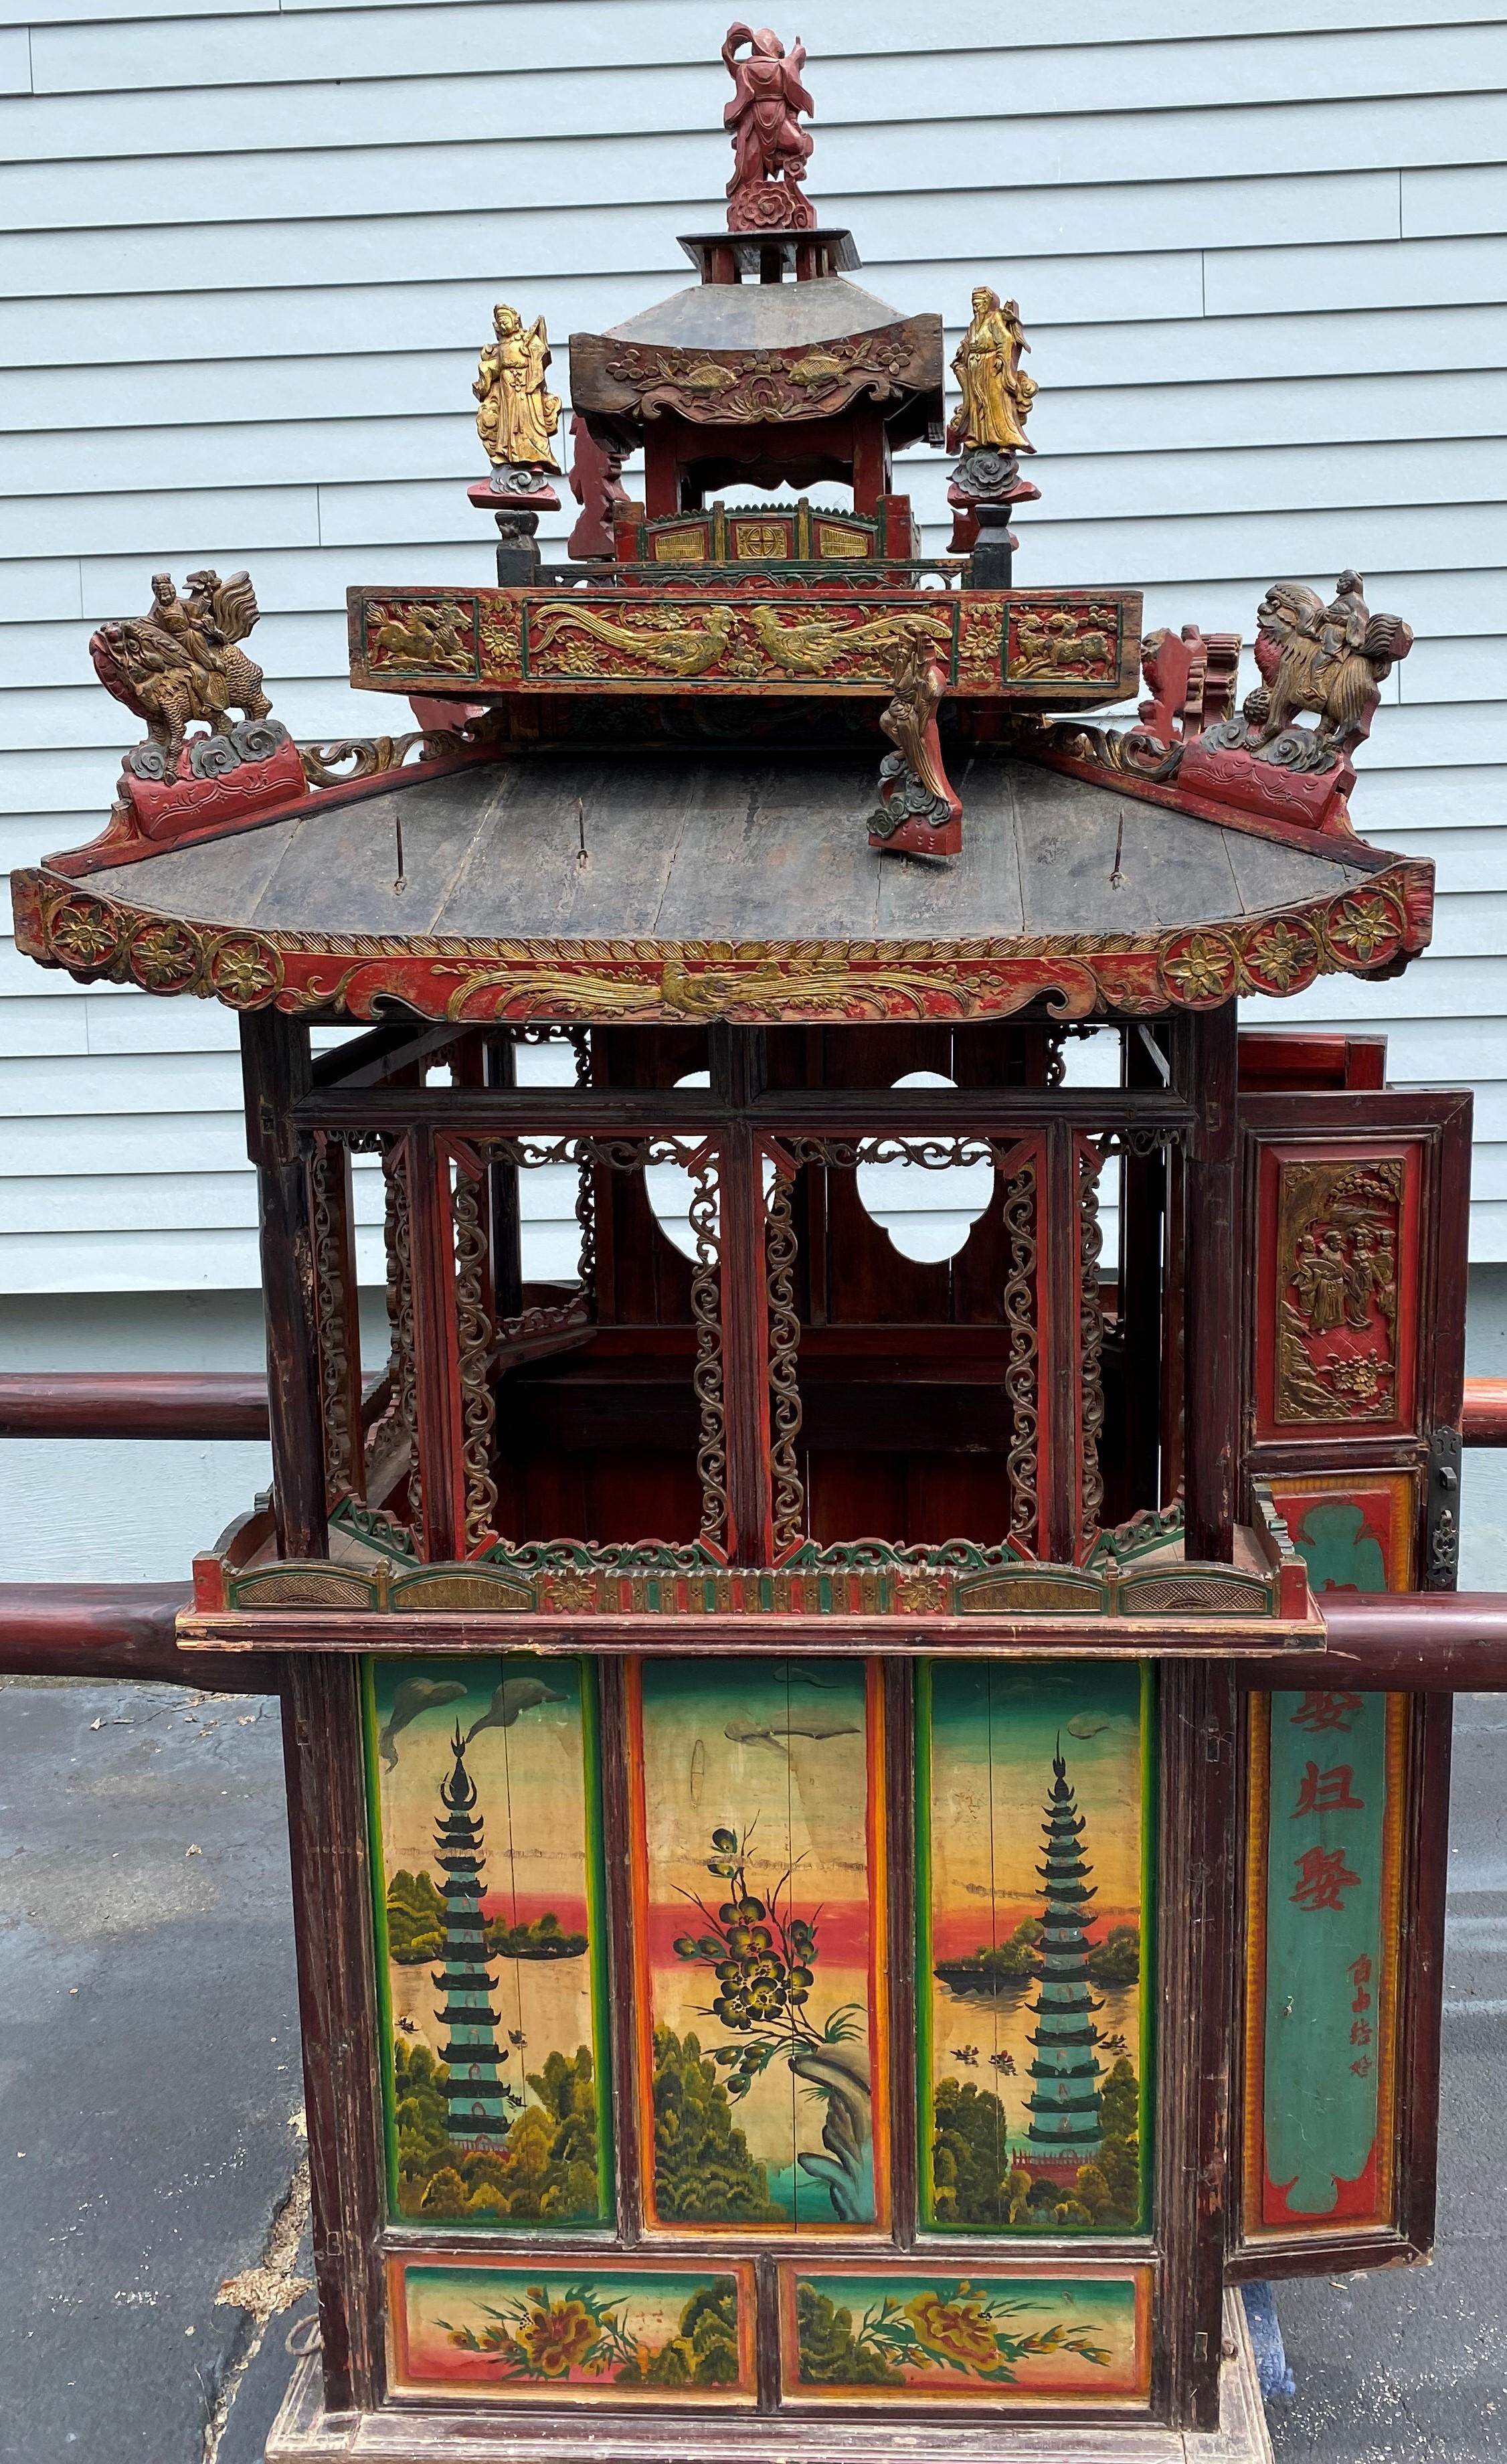 A fine example of an antique Chinese wedding sedan chair with lift poles, with removable pagoda style roof decorated with gilt carved figures and floral borders, surmounting a single seat red painted cabin with two decorated doors for the bride to